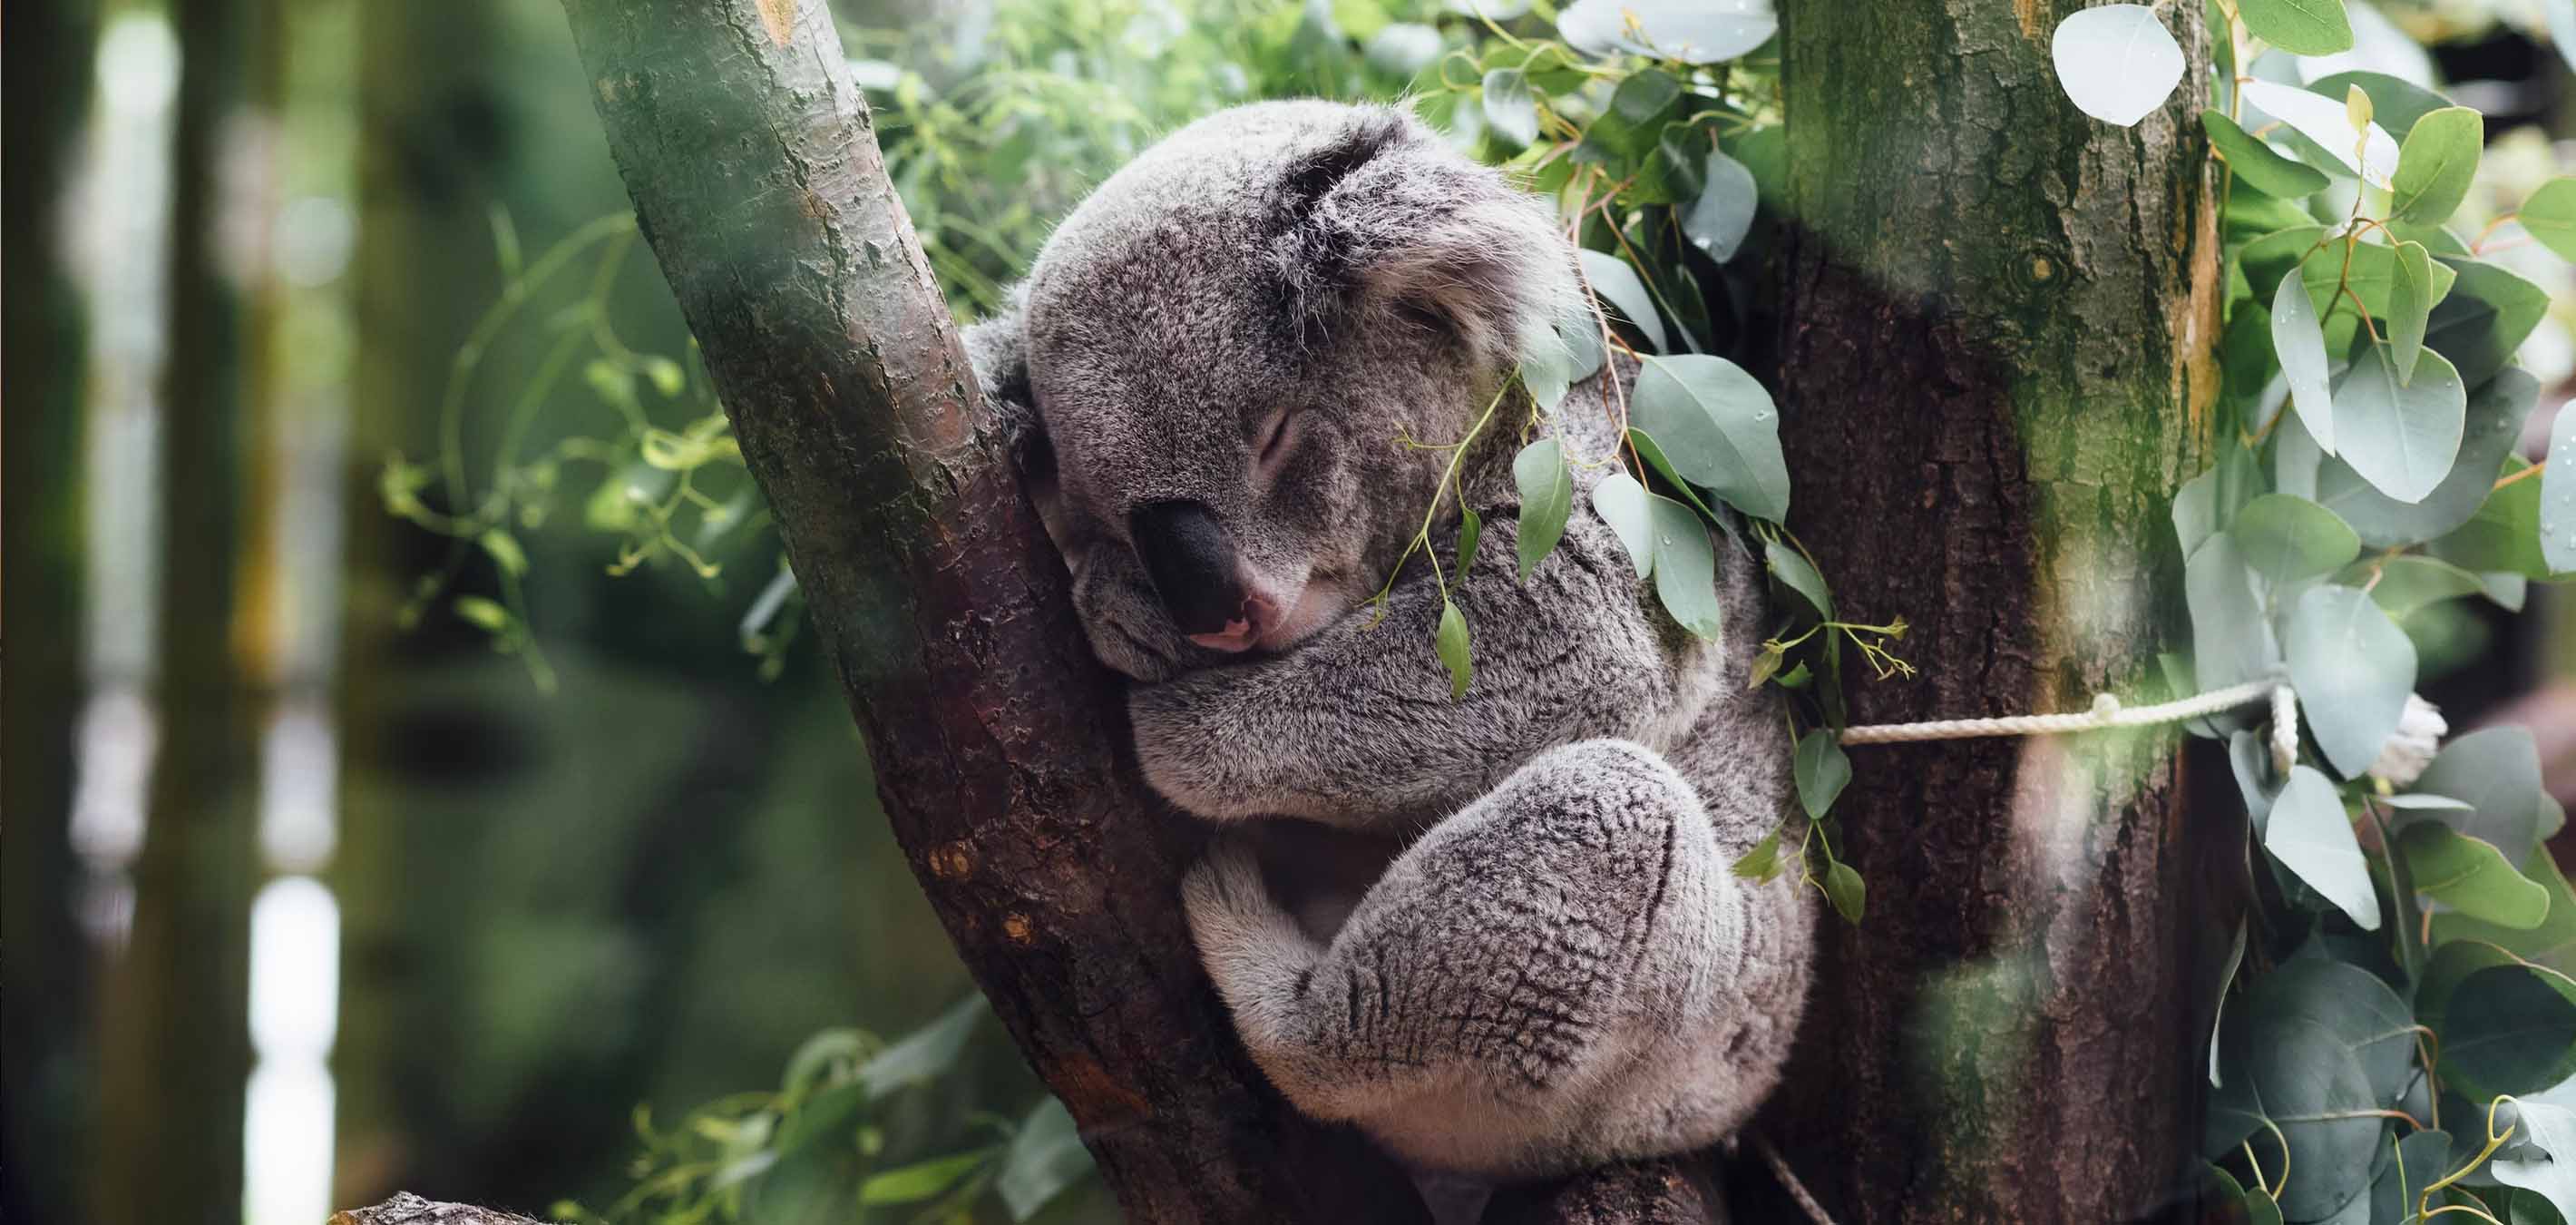 Koala Animal Facts – Diet, Lifestyle, Conservation & More!